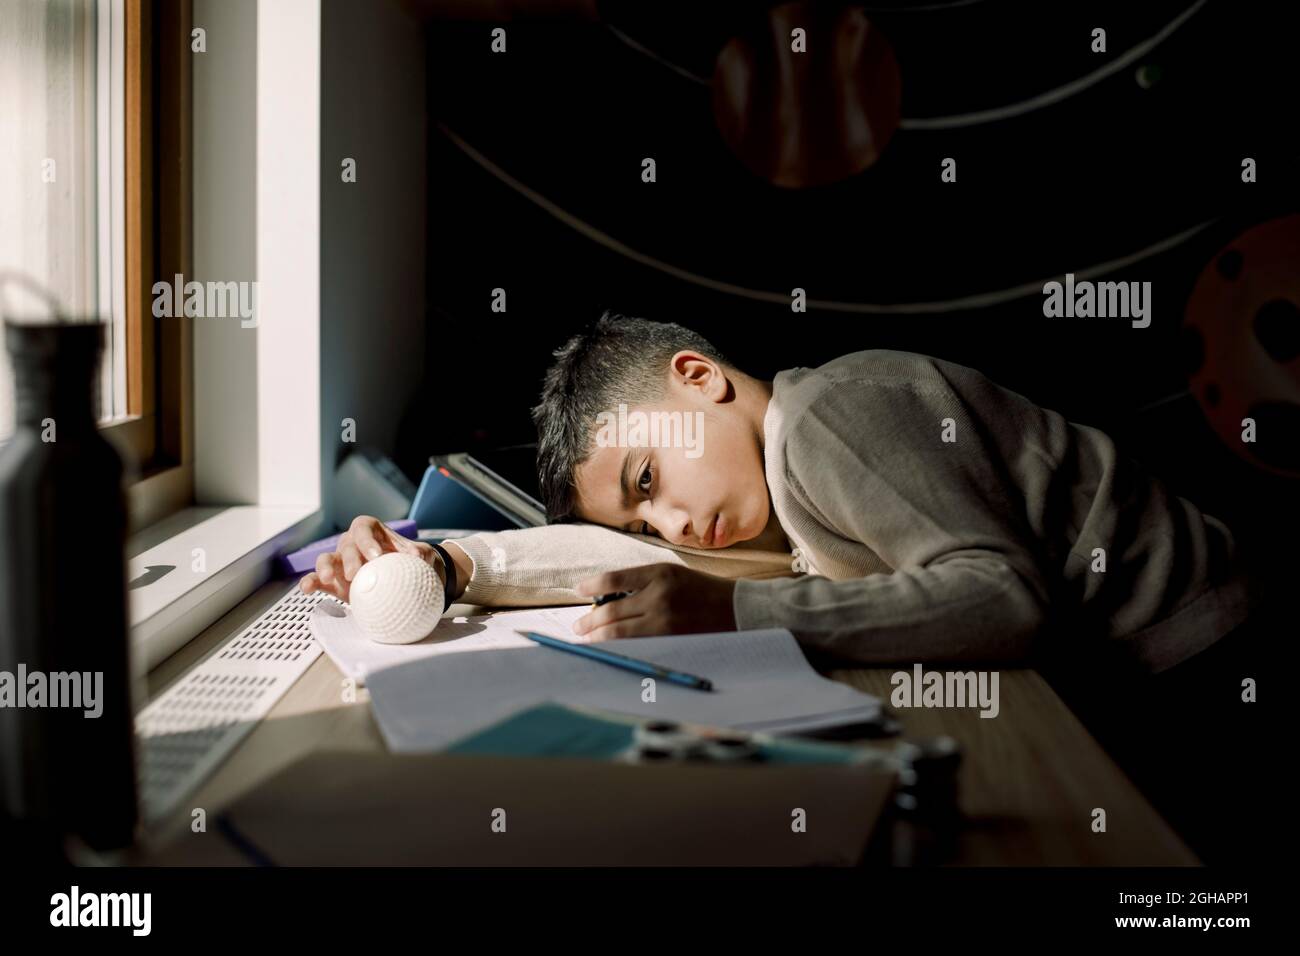 Tired pre-adolescent boy resting head on table in bedroom Stock Photo